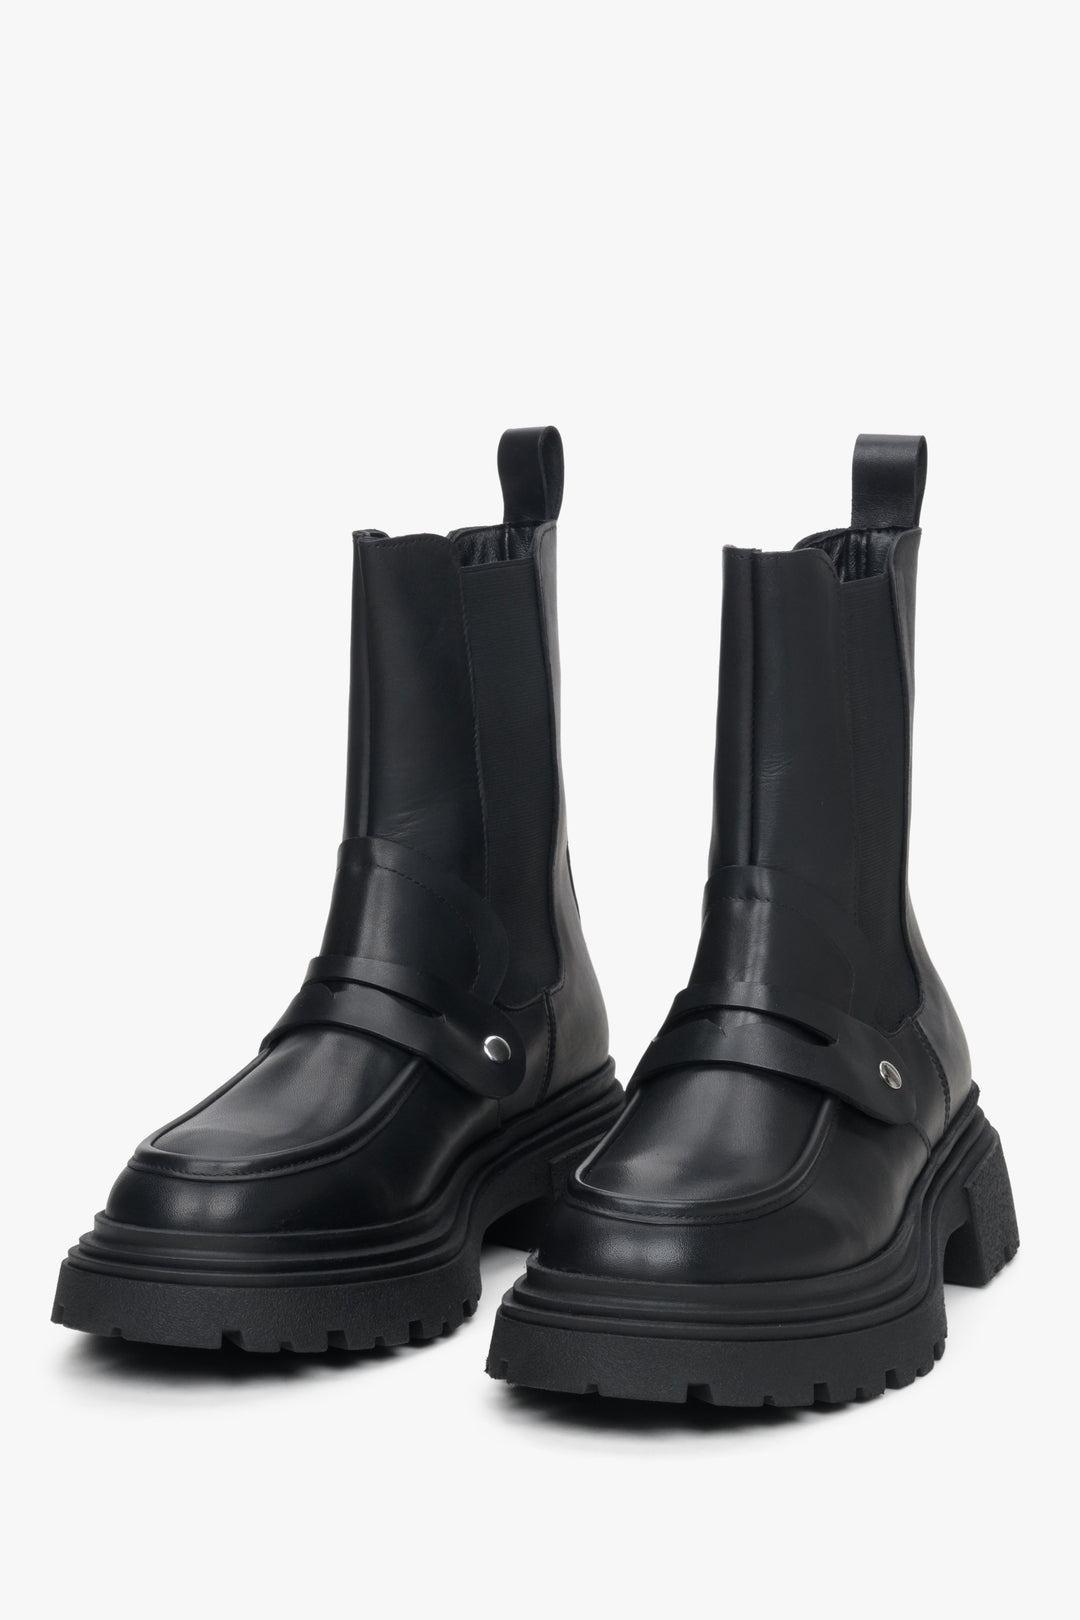 Women's black leather Chelsea boots by Estro - close-up on the front of the model.